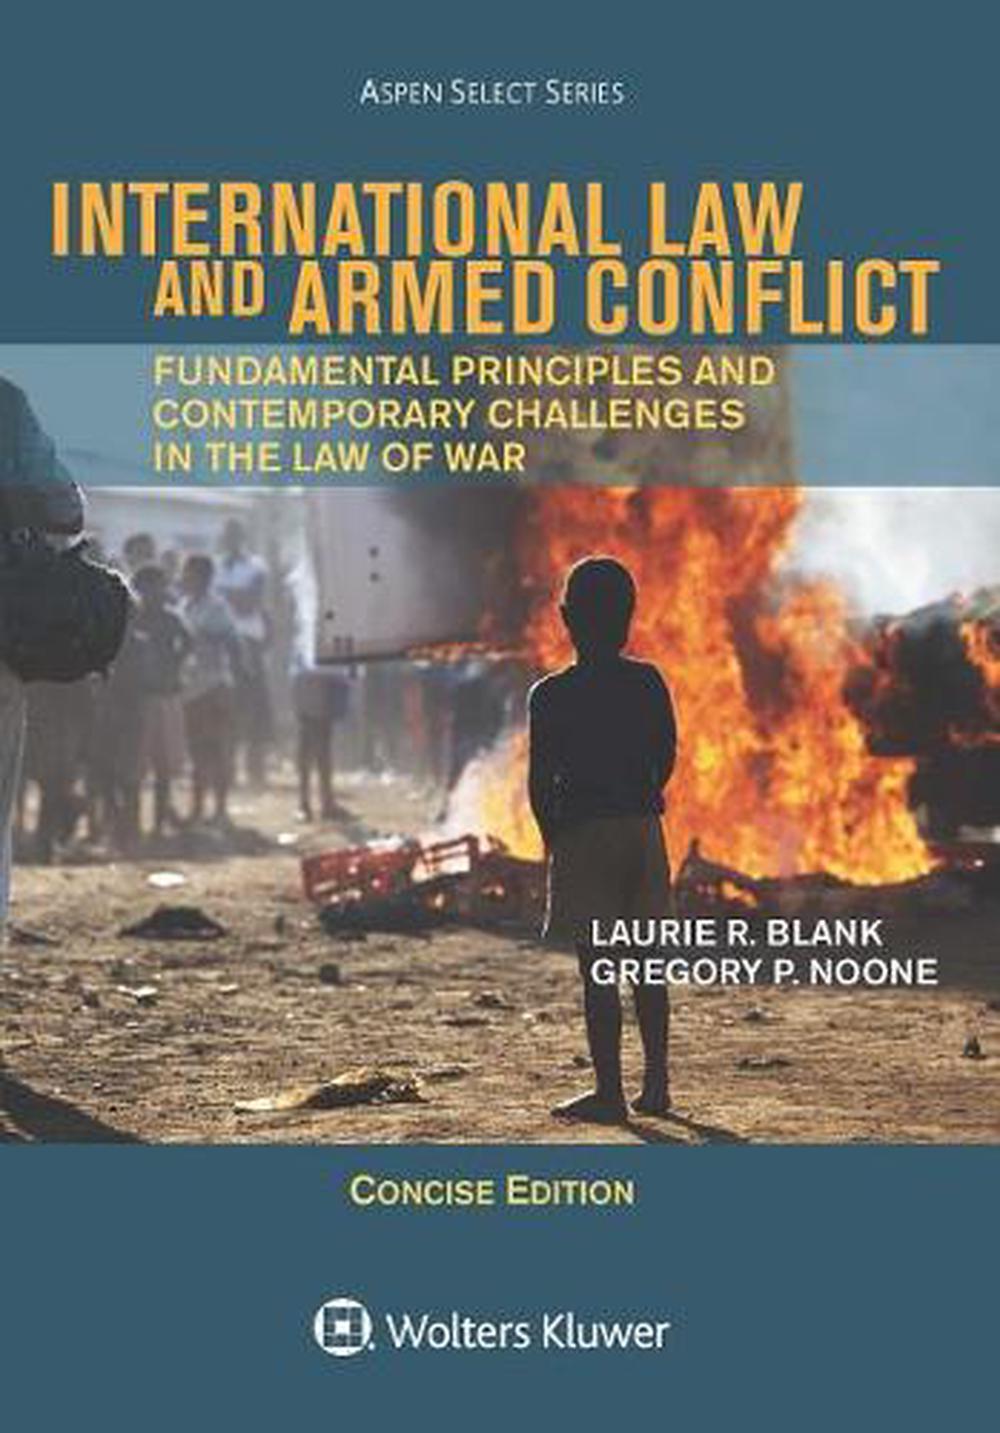 are the laws of armed conflict sufficient in today